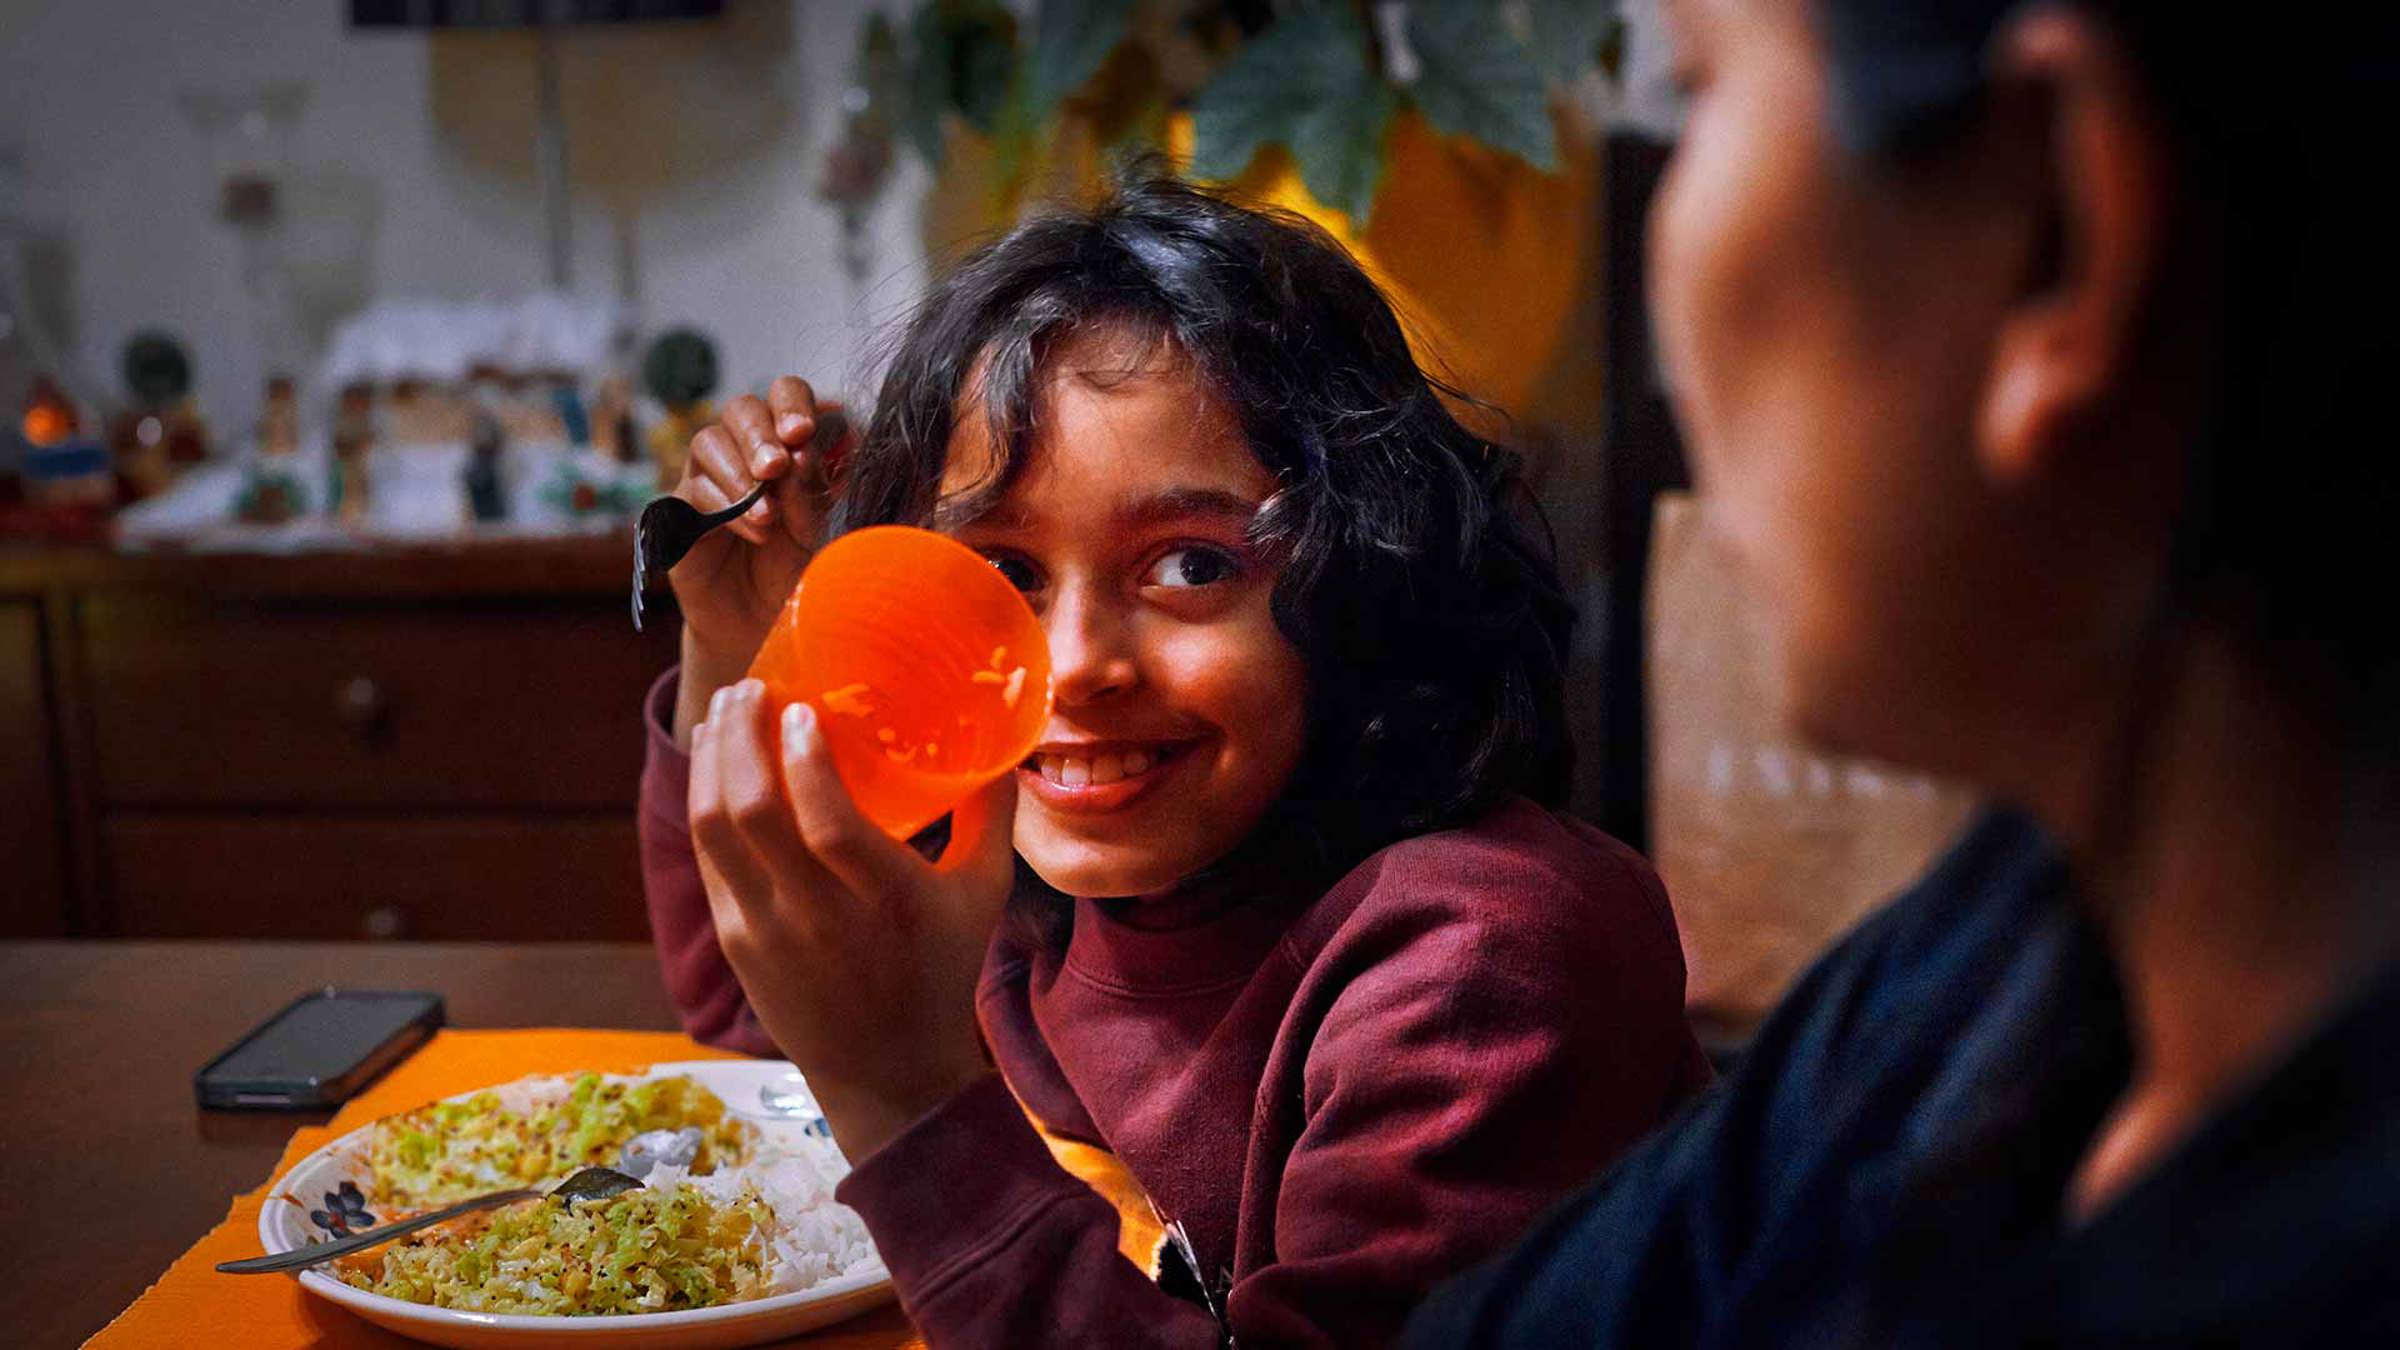 A child showing a cup to their mother over dinner